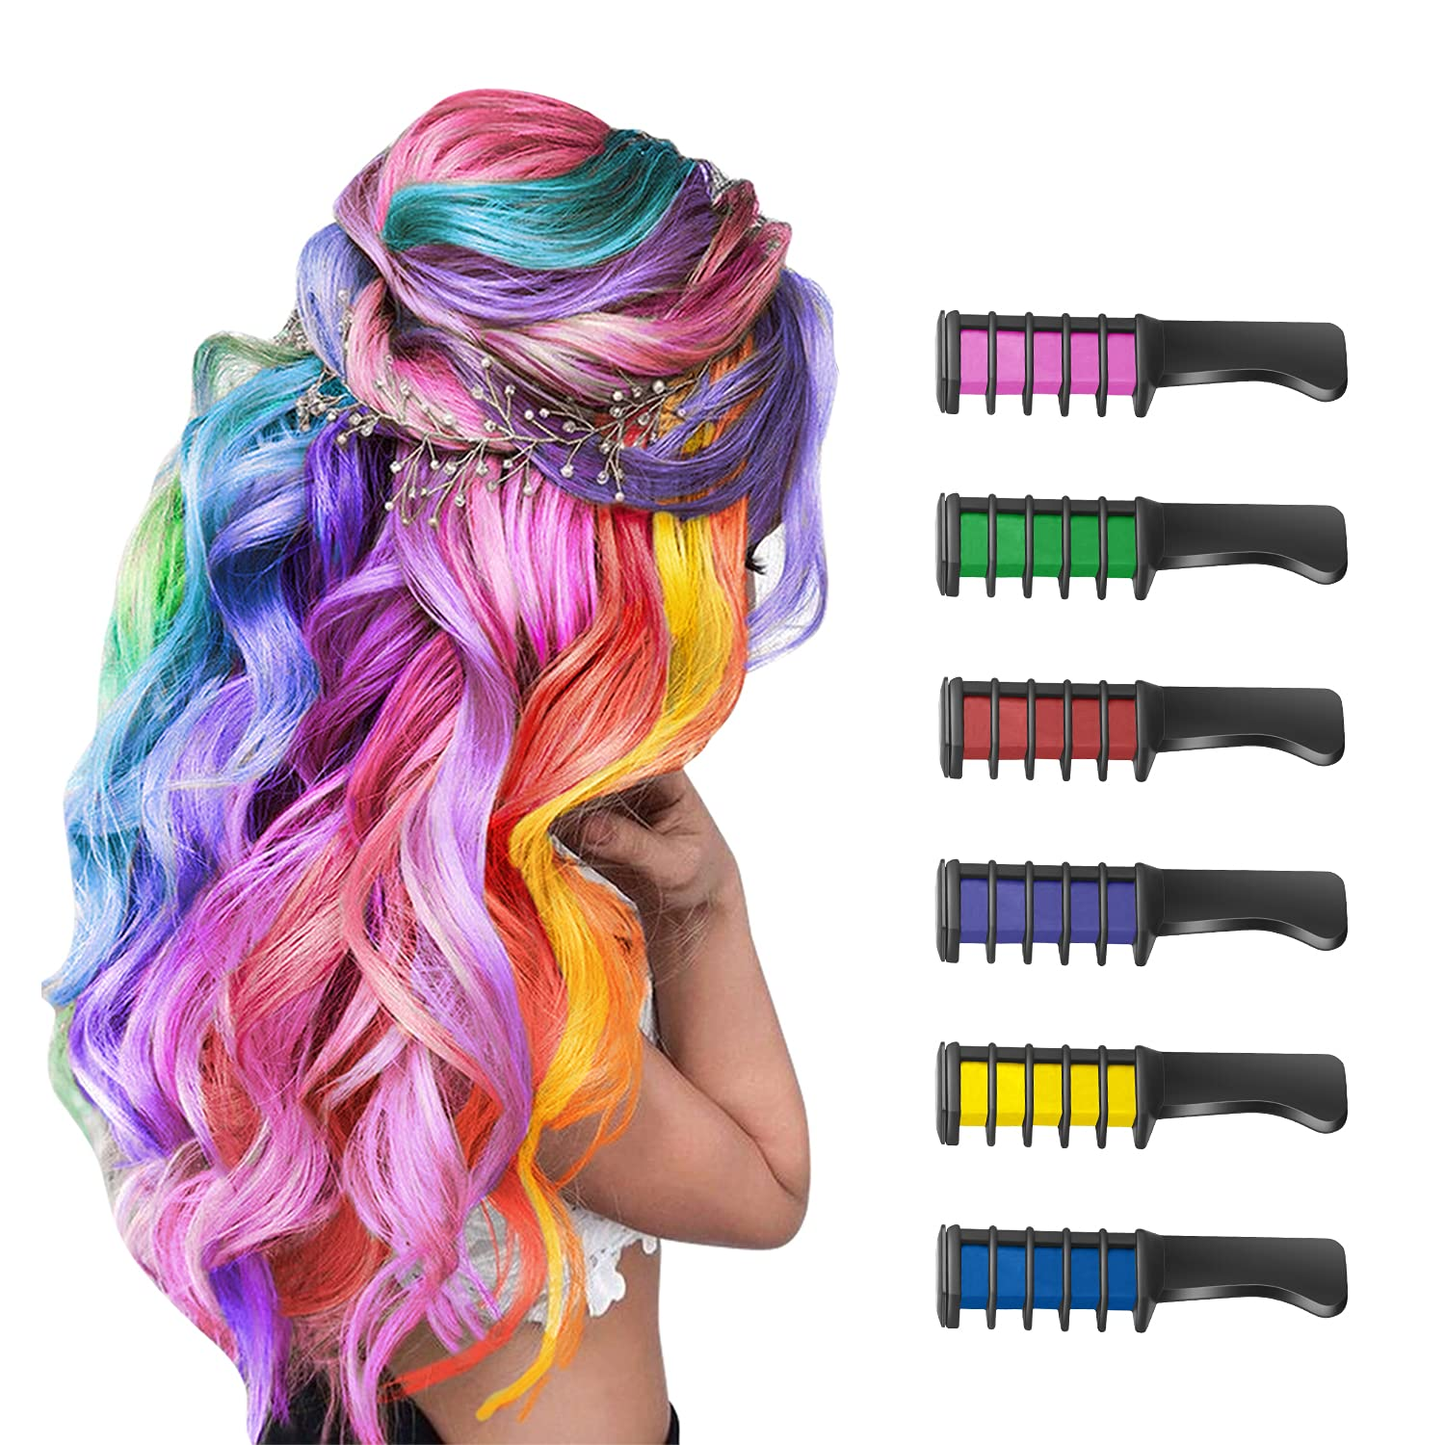 New Hair Chalk Comb Temporary Hair Color Dye for Girls Kids, Washable Hair Chalk for Girls Age 4 5 6 7 8 9 10 Birthday Party Cosplay DIY, Children S Day, 6 Colors